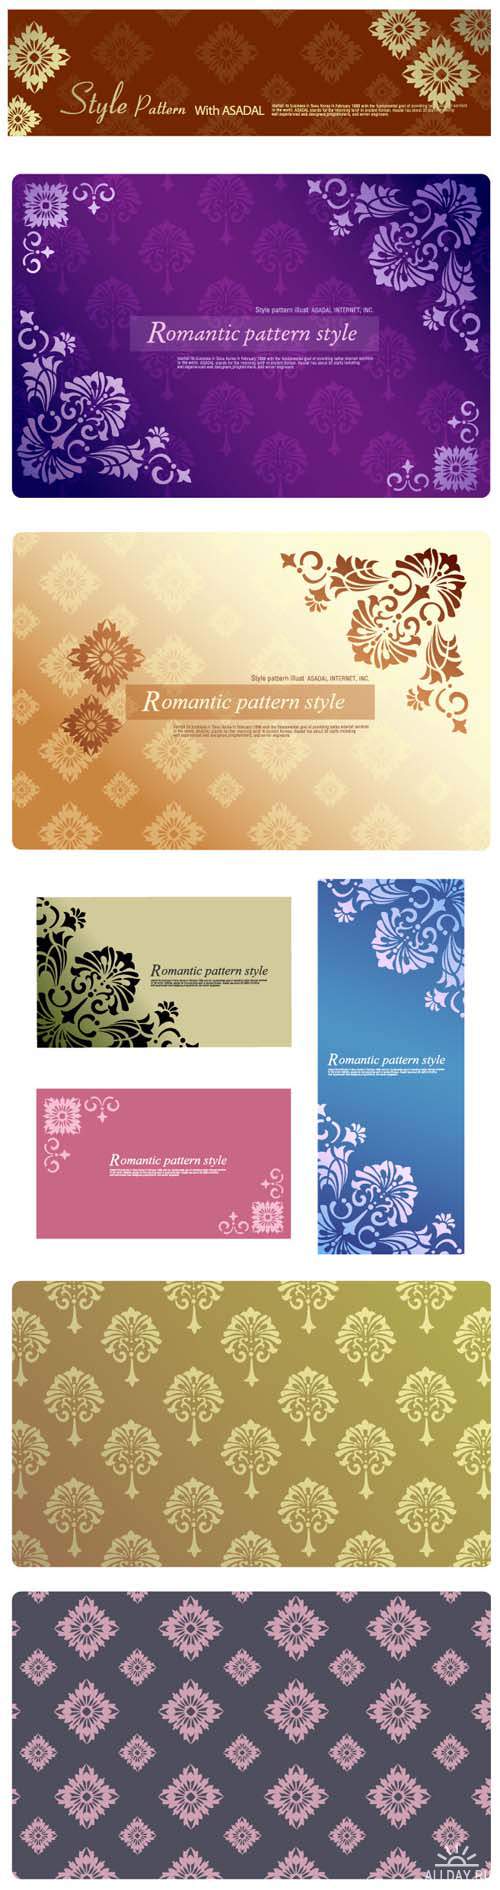 Romantic Vector Patterns with Vintage ornament